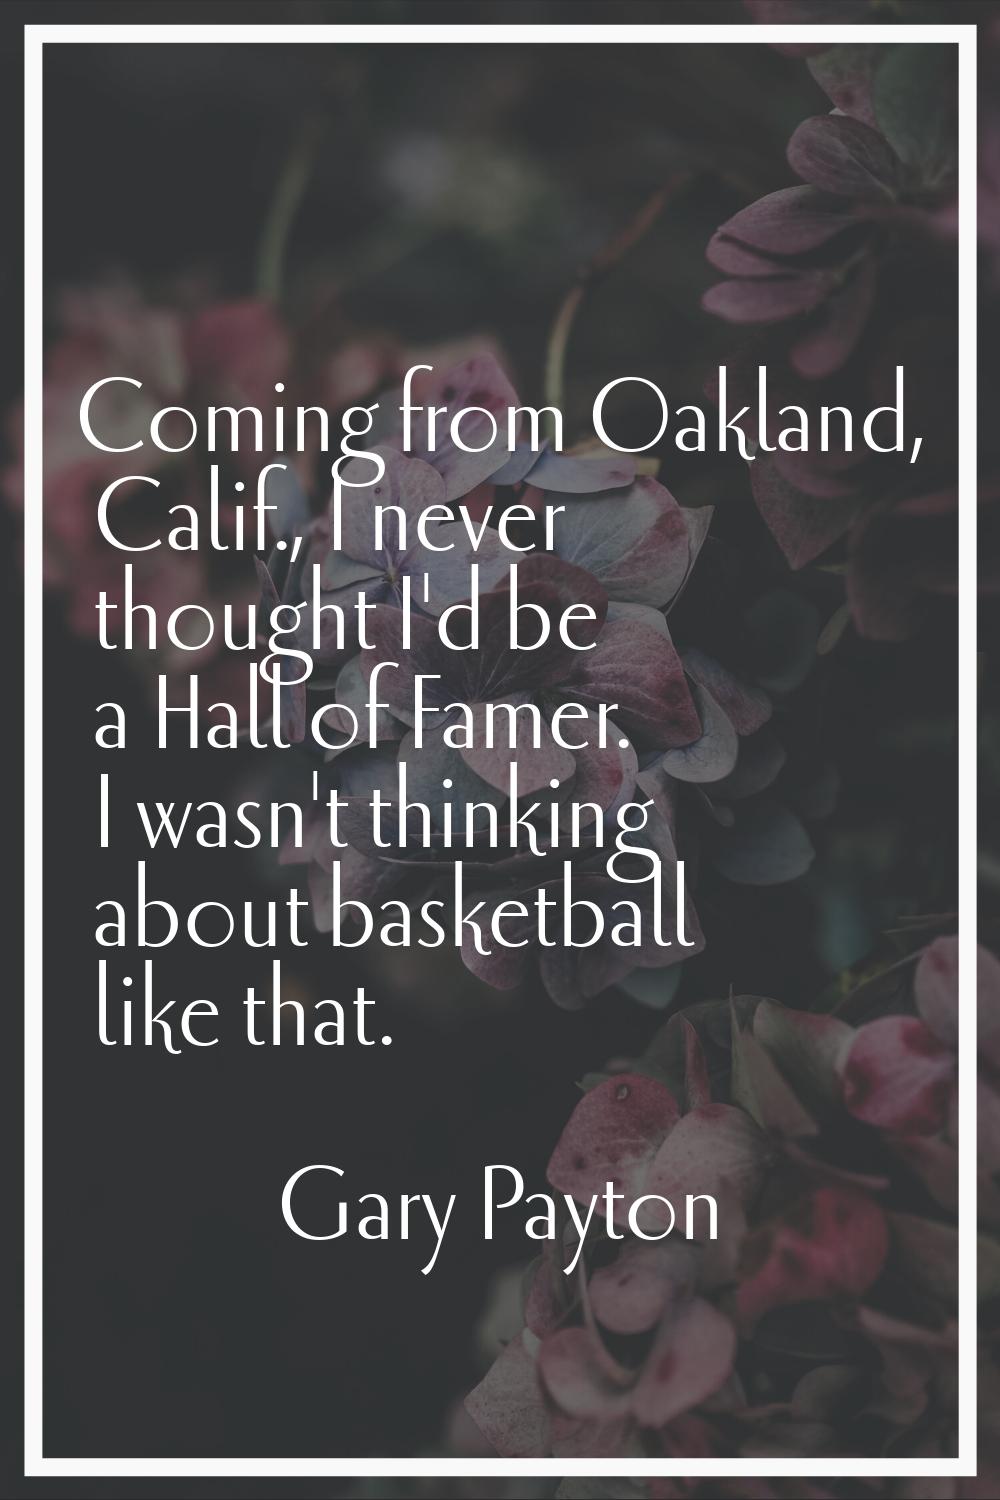 Coming from Oakland, Calif., I never thought I'd be a Hall of Famer. I wasn't thinking about basket